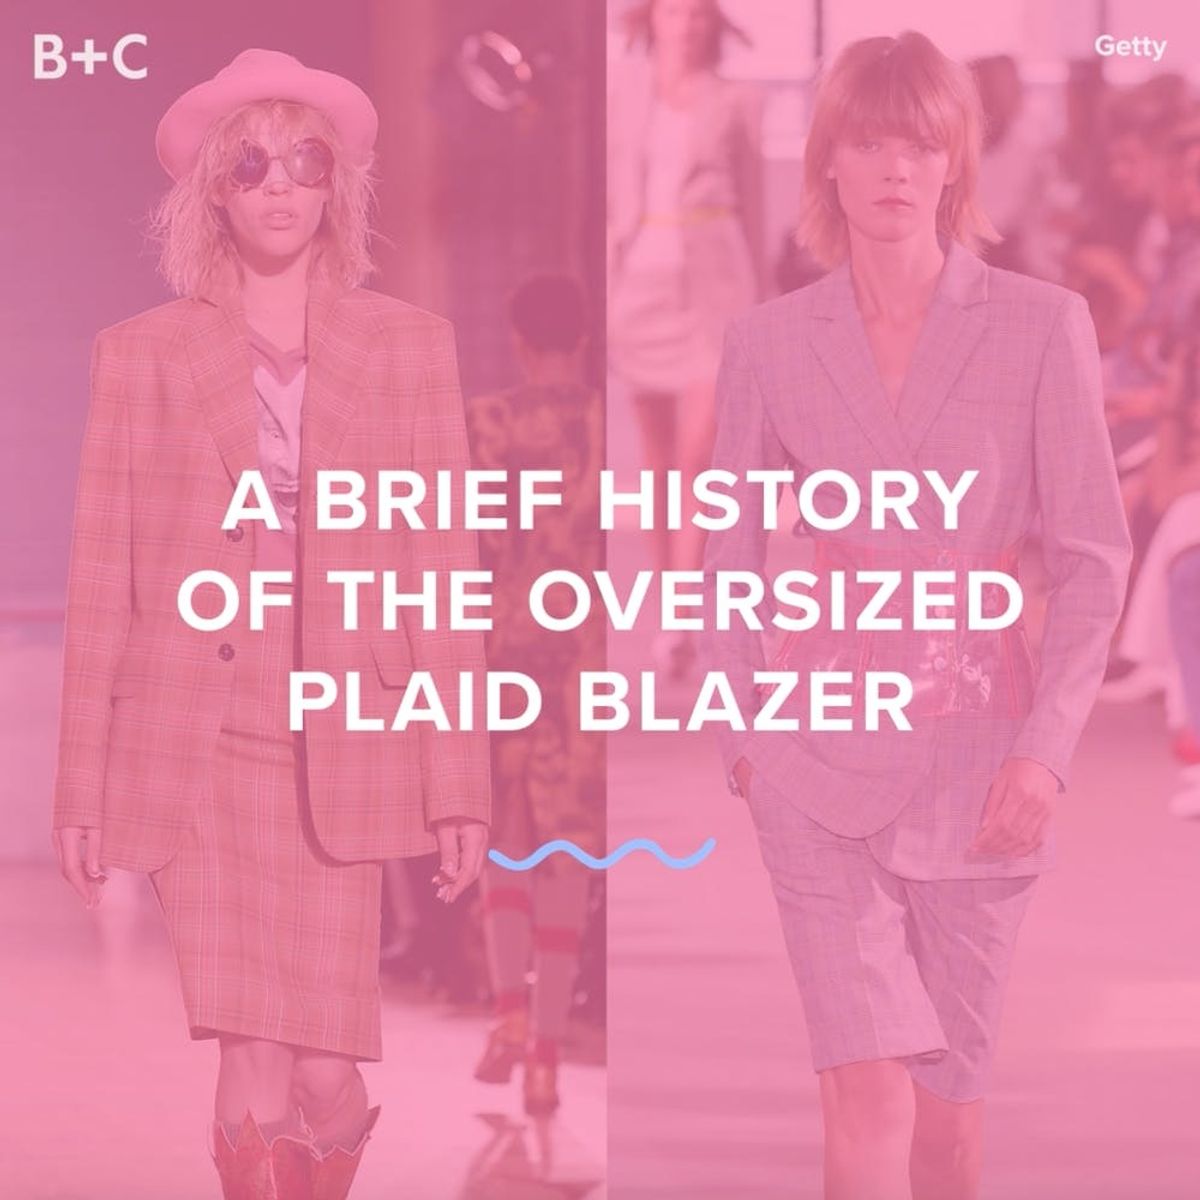 A Brief History of the Oversized Blazer